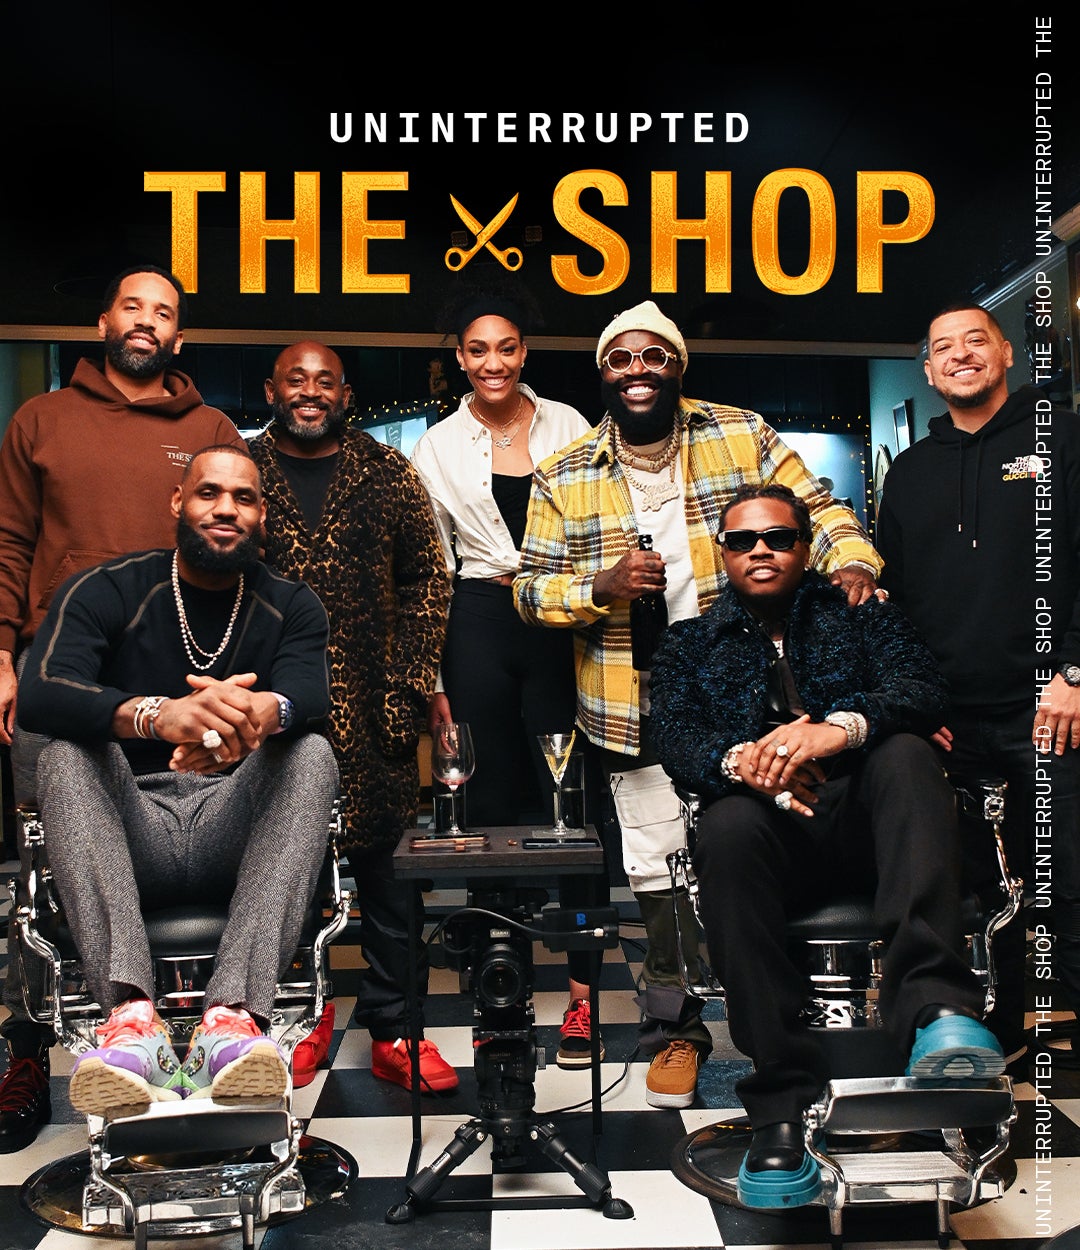 WNBA MVP A’Ja Wilson Joins LeBron James, Gunna, Rick Ross & More In A Must-See Episode Of ‘UNINTERRUPTED The Shop’